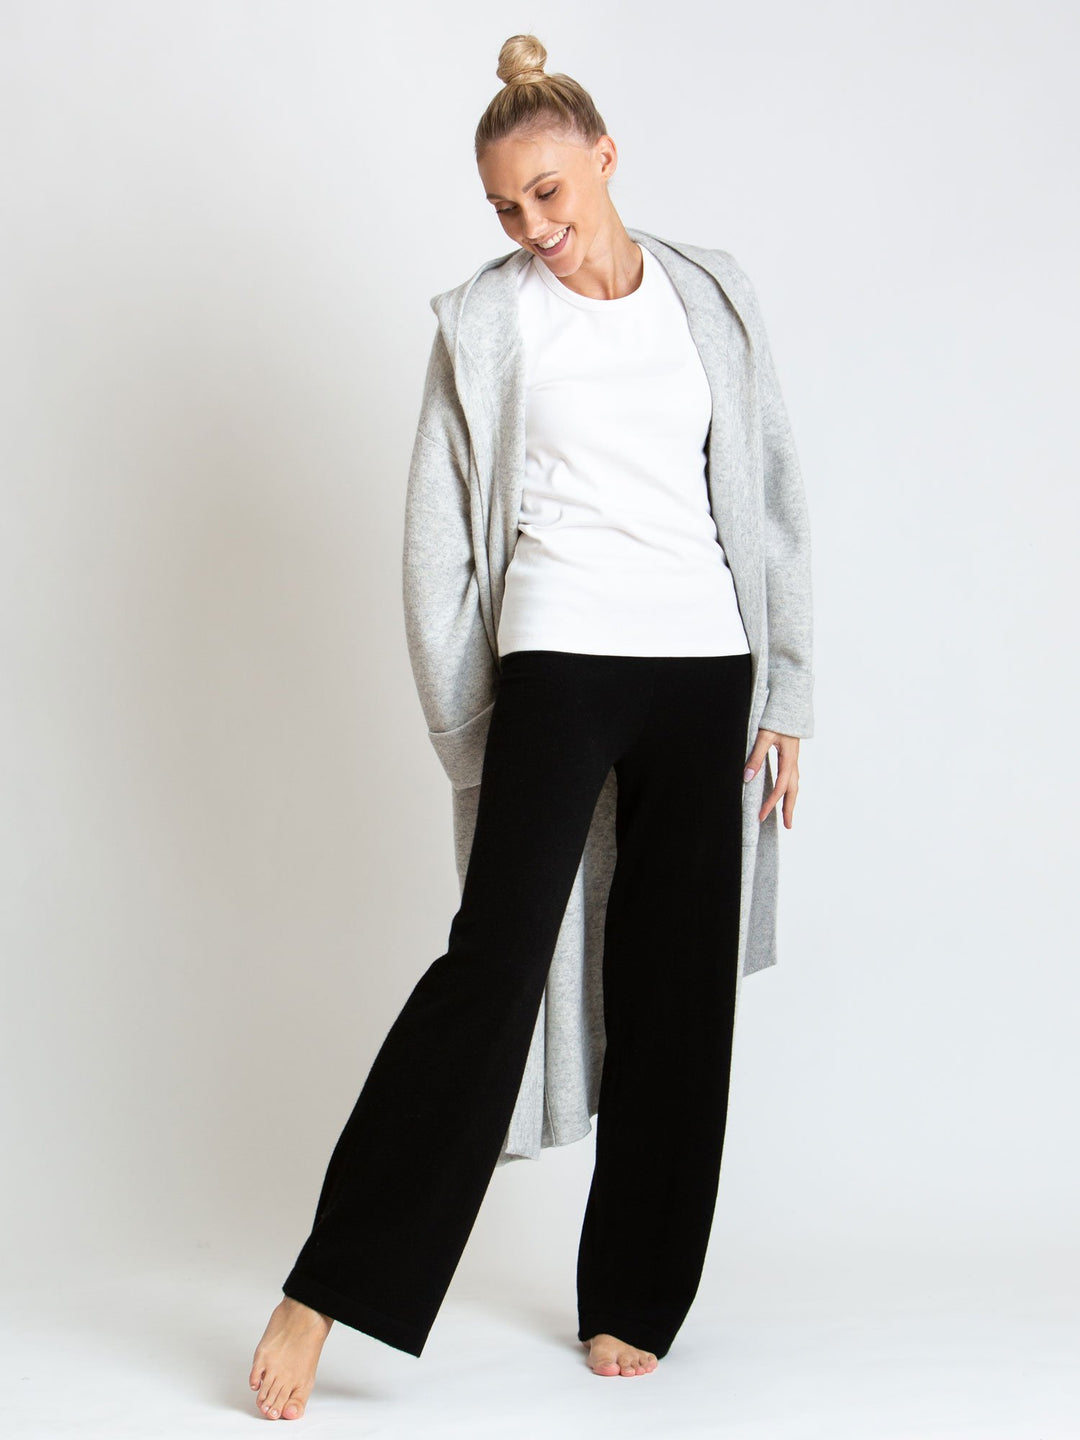 Cashmere wool pants "Classic Pants" in 100% cashmere wool. Color: Black. Scandinavian design by Kashmina.